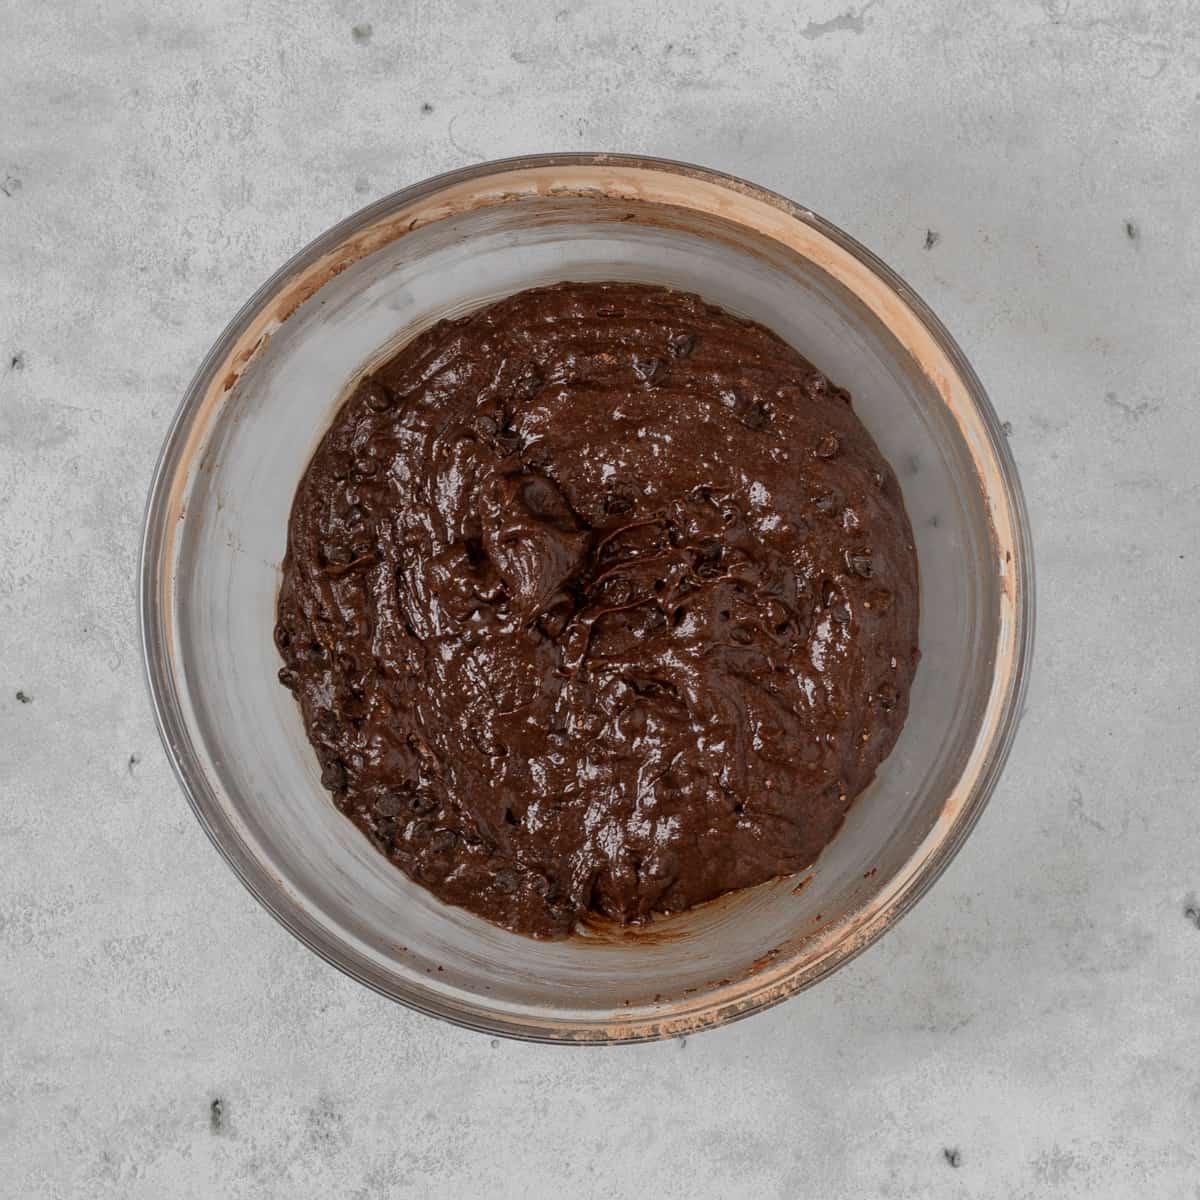 the completed brownie batter in a glass bowl on grey background